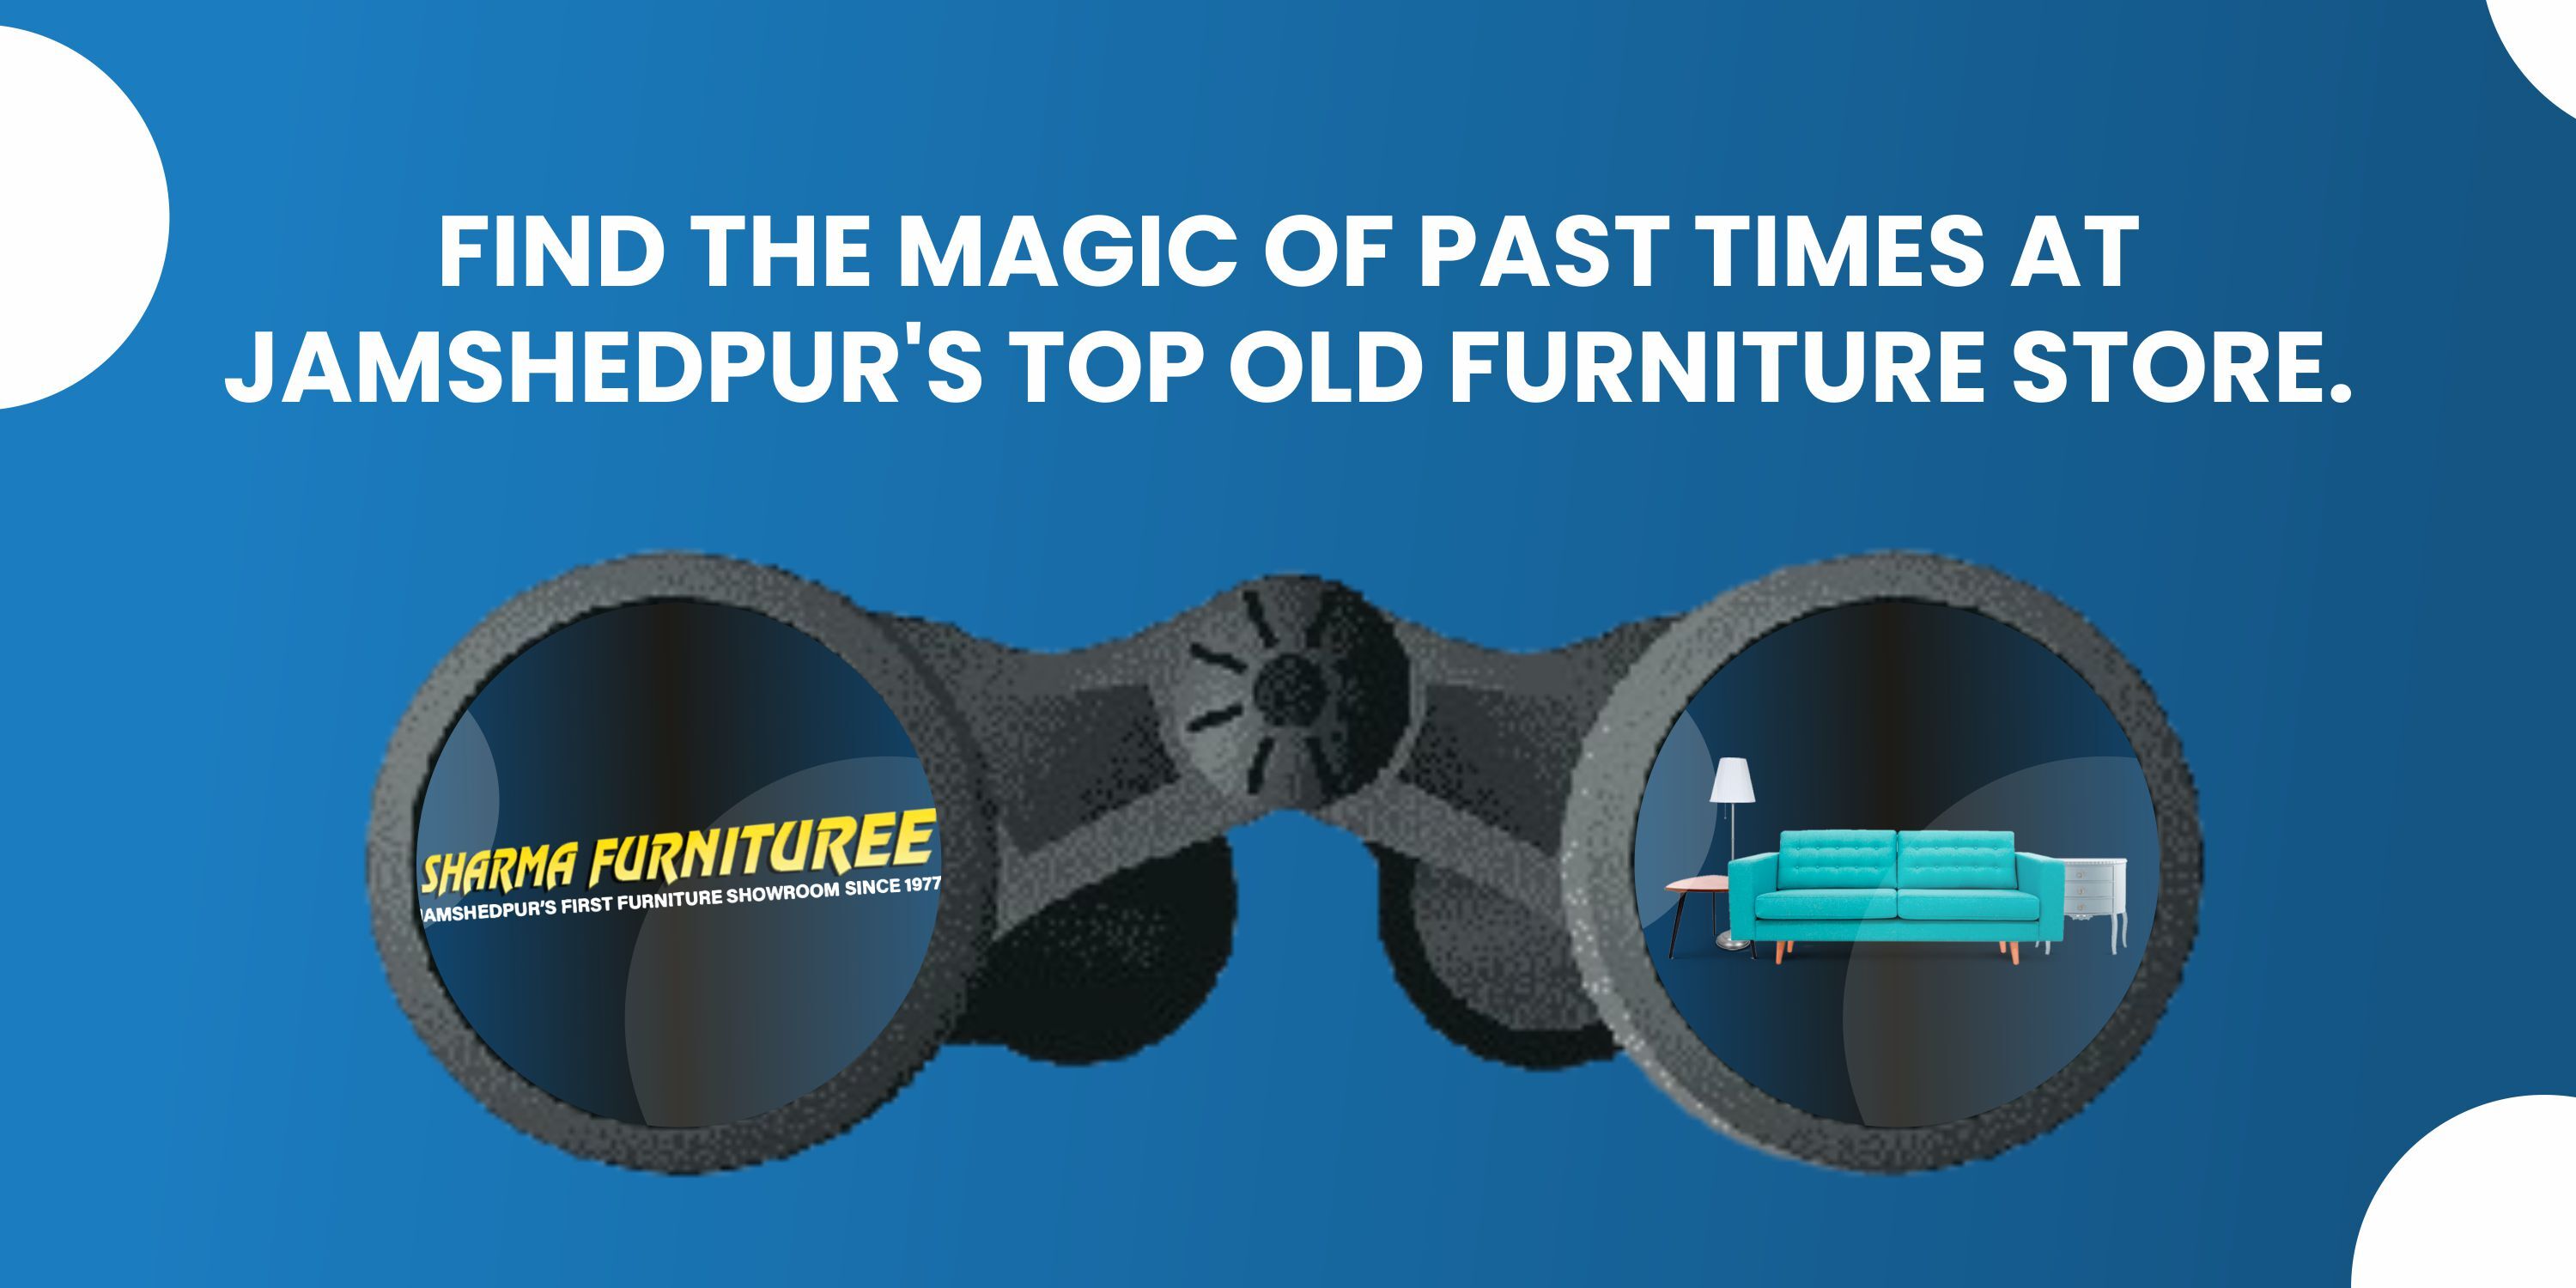 Find the Magic of Past Times at Jamshedpur's Top Old Furniture Store.